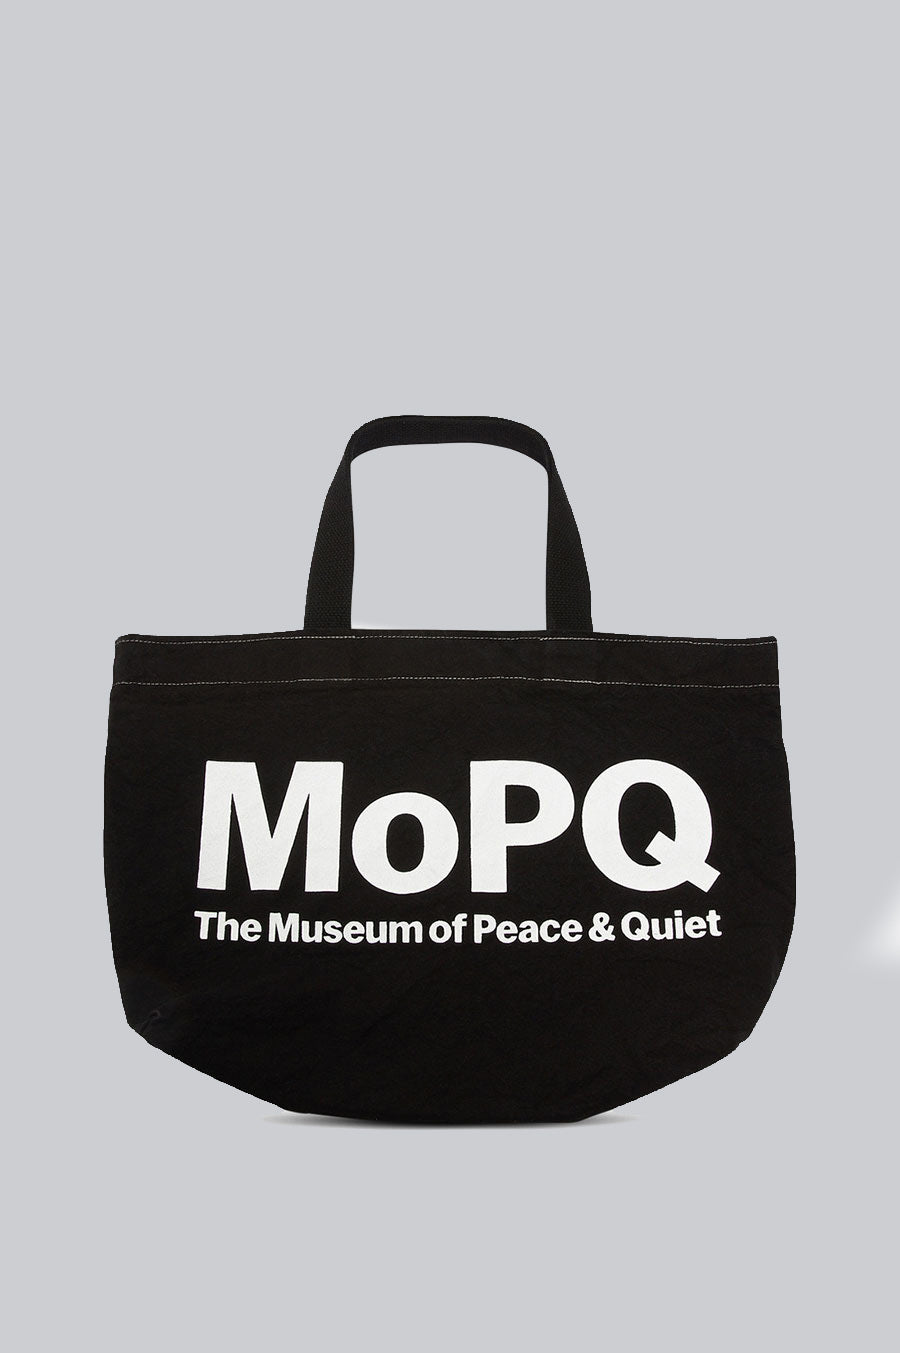 MUSEUM OF PEACE AND QUIET CONTEMPORARY MUSEUM TOTE BLACK